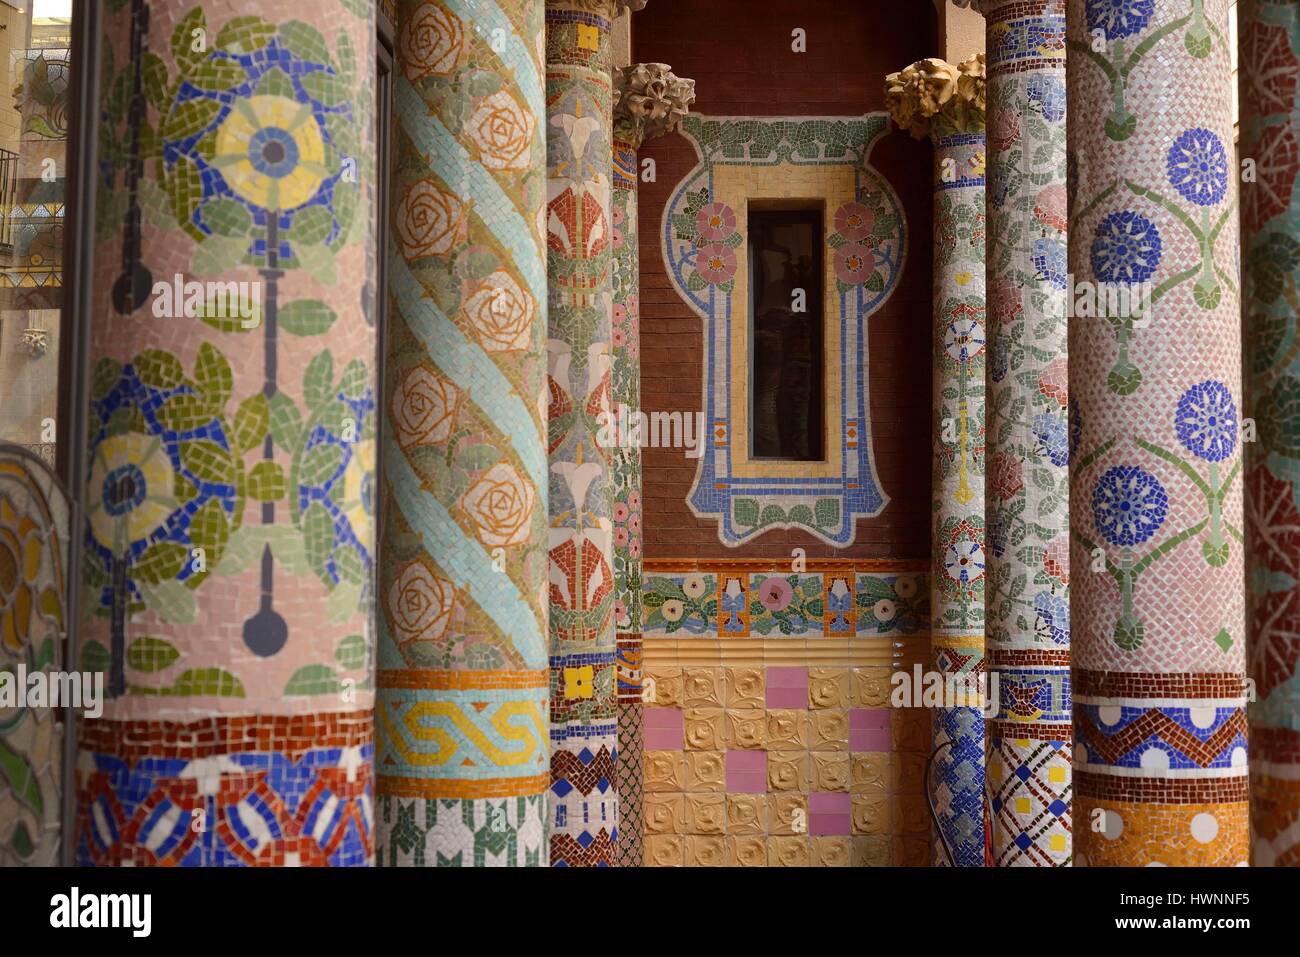 Spain, Catalonia, Barcelona, the Palau de la Musica Catalana (Palace of Catalan Music) listed as World Heritage by UNESCO, Modernist architecture by architect Domenech i Montaner, the columns of the exterior loggia Stock Photo